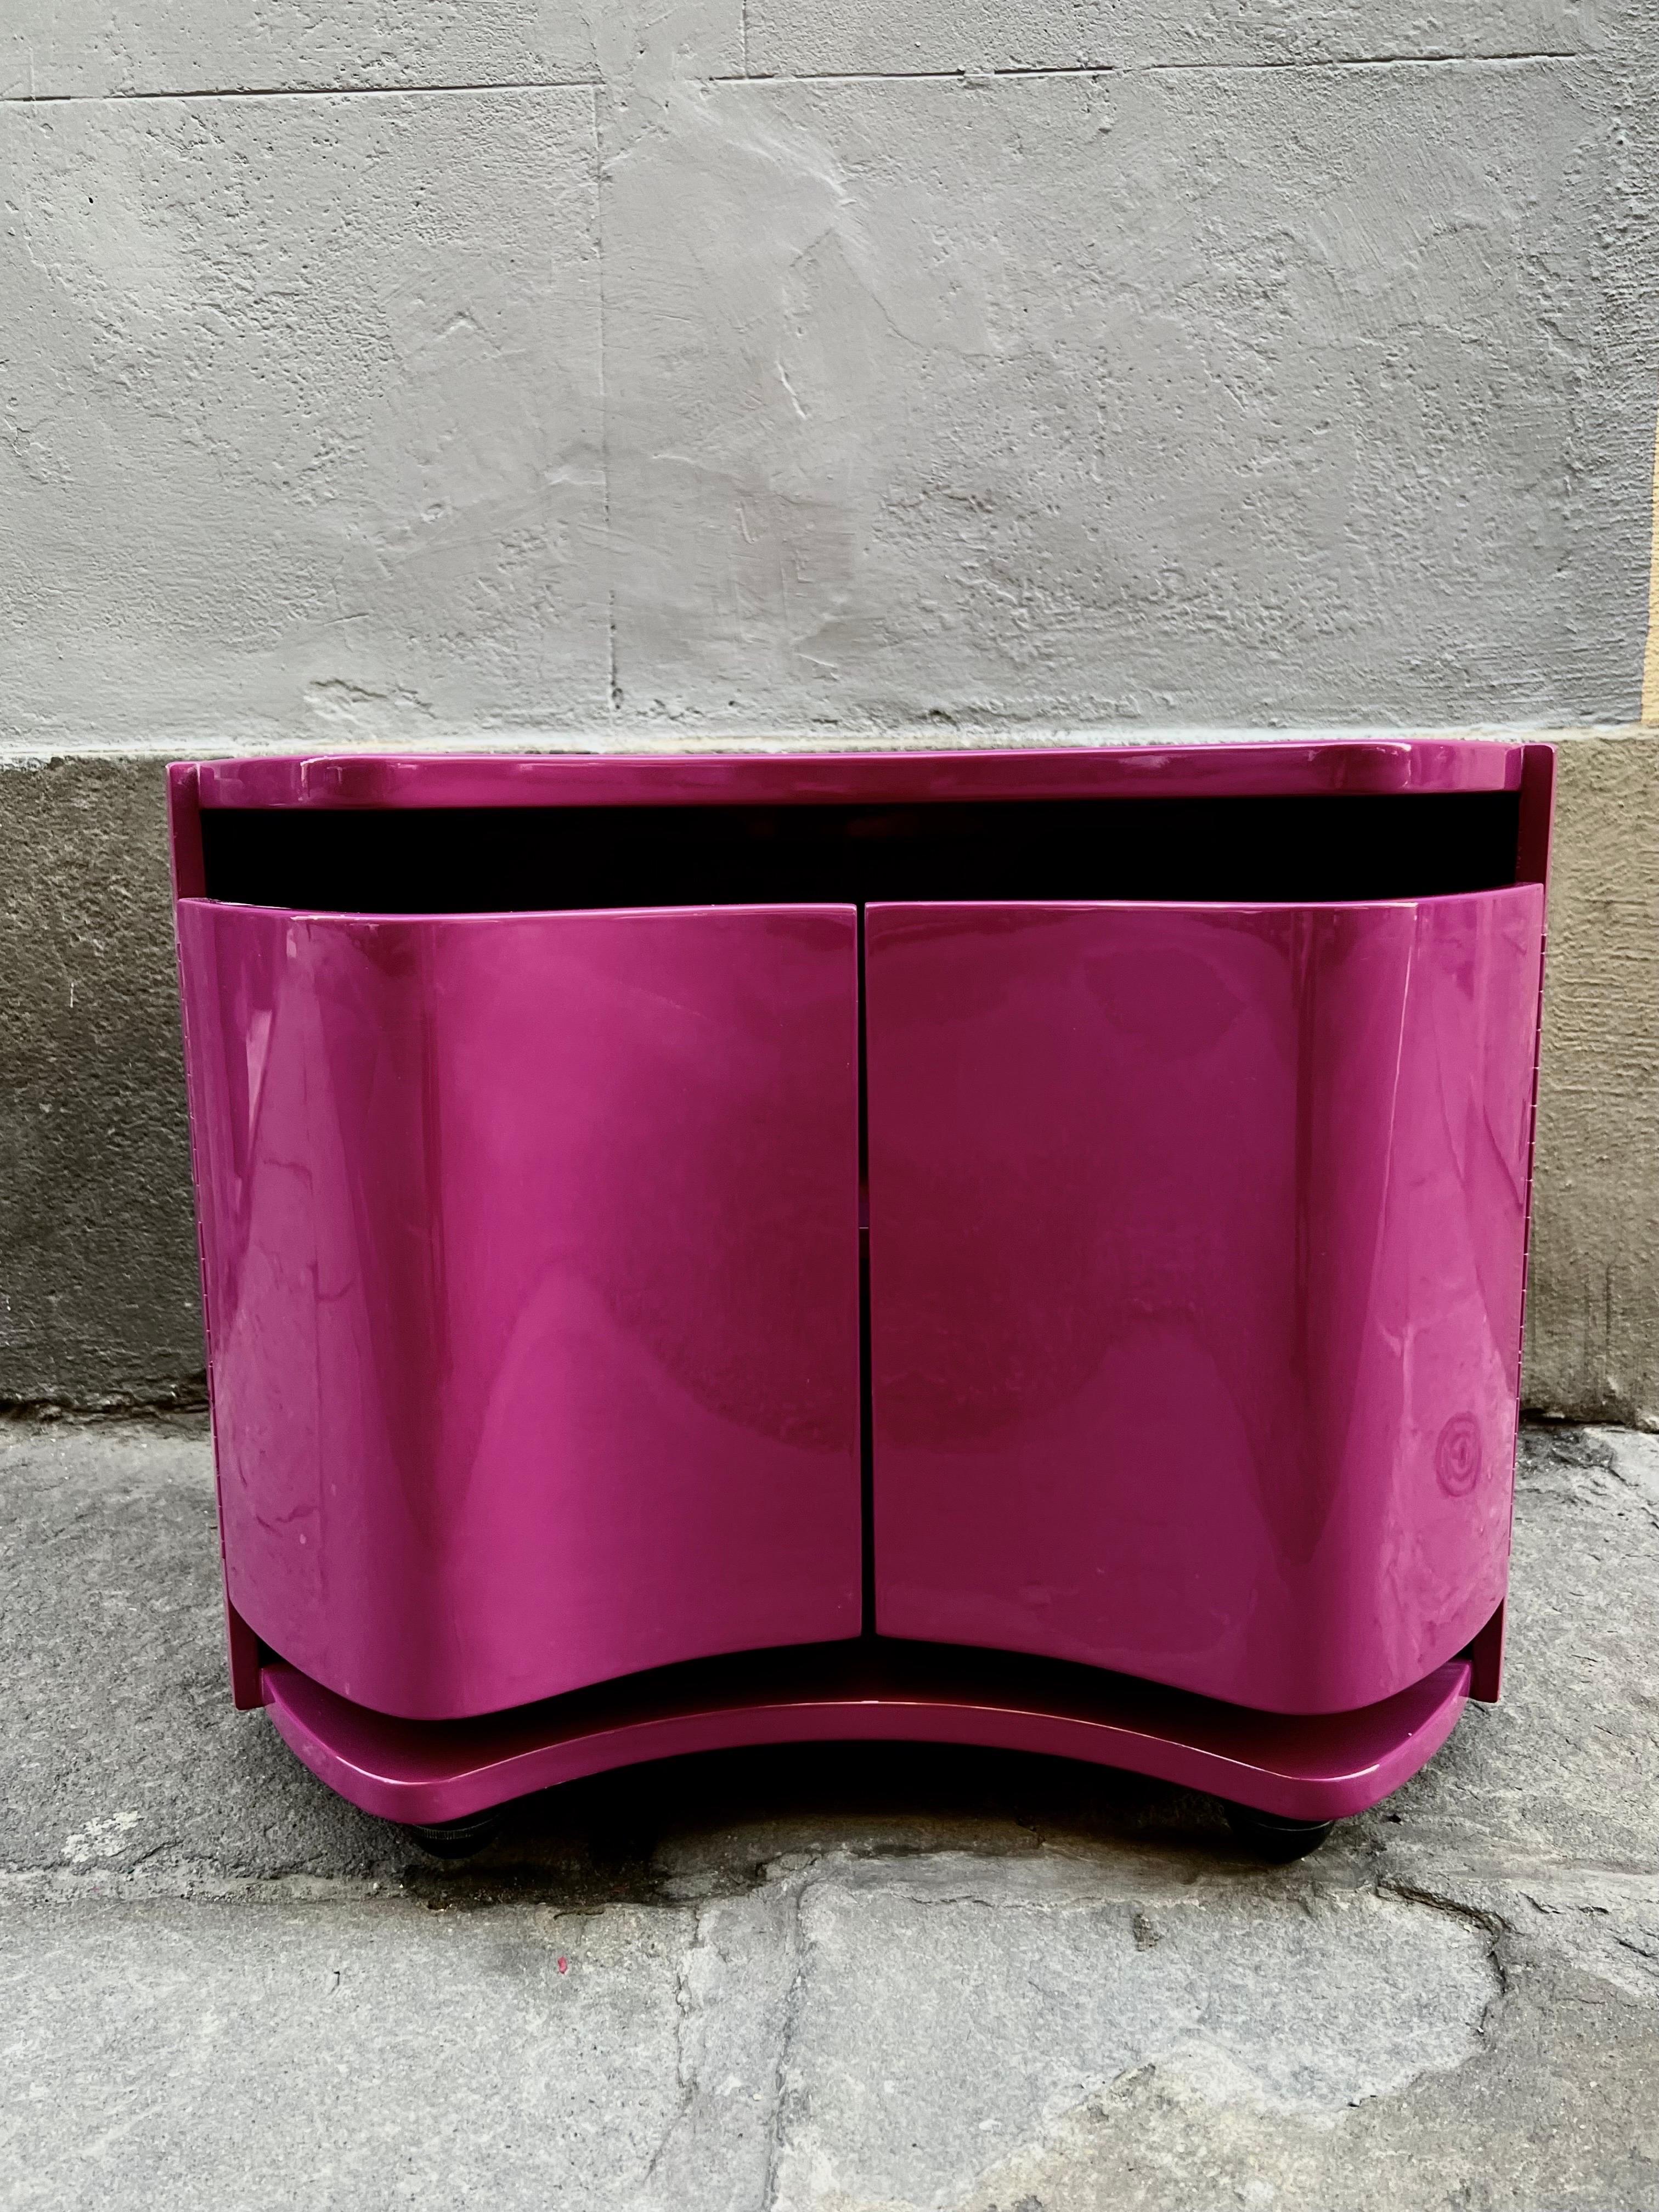 Pair of Cyclamen Colour Lacquered Resin Night Stands by Benatti Italy, 1966 For Sale 8